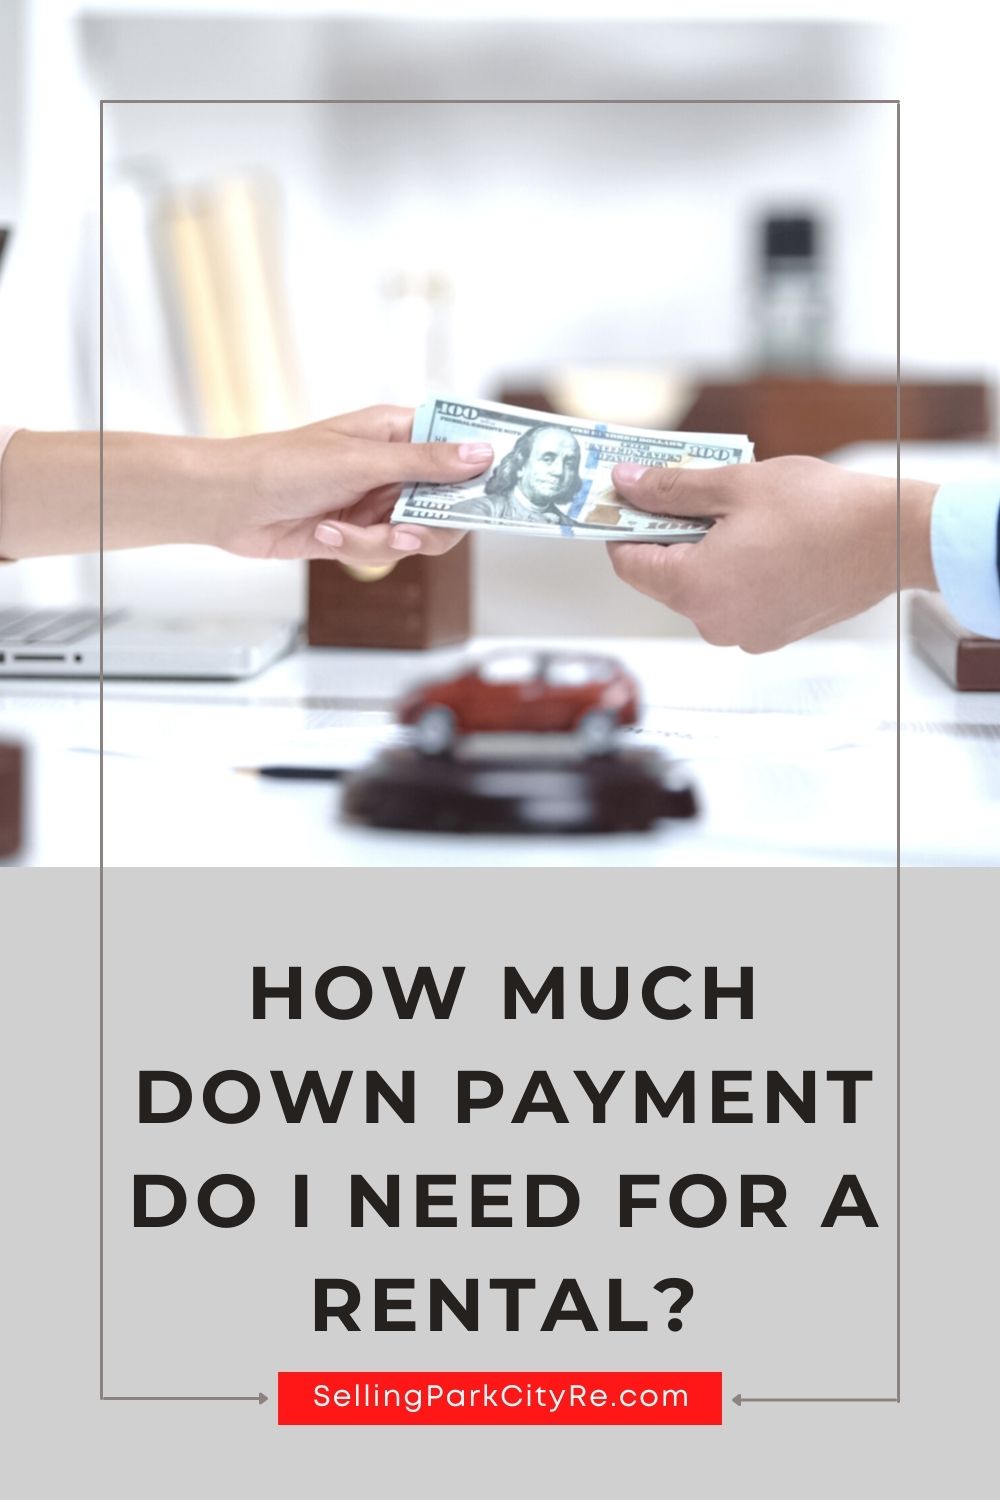 How Much Down Payment Do I Need For A Rental